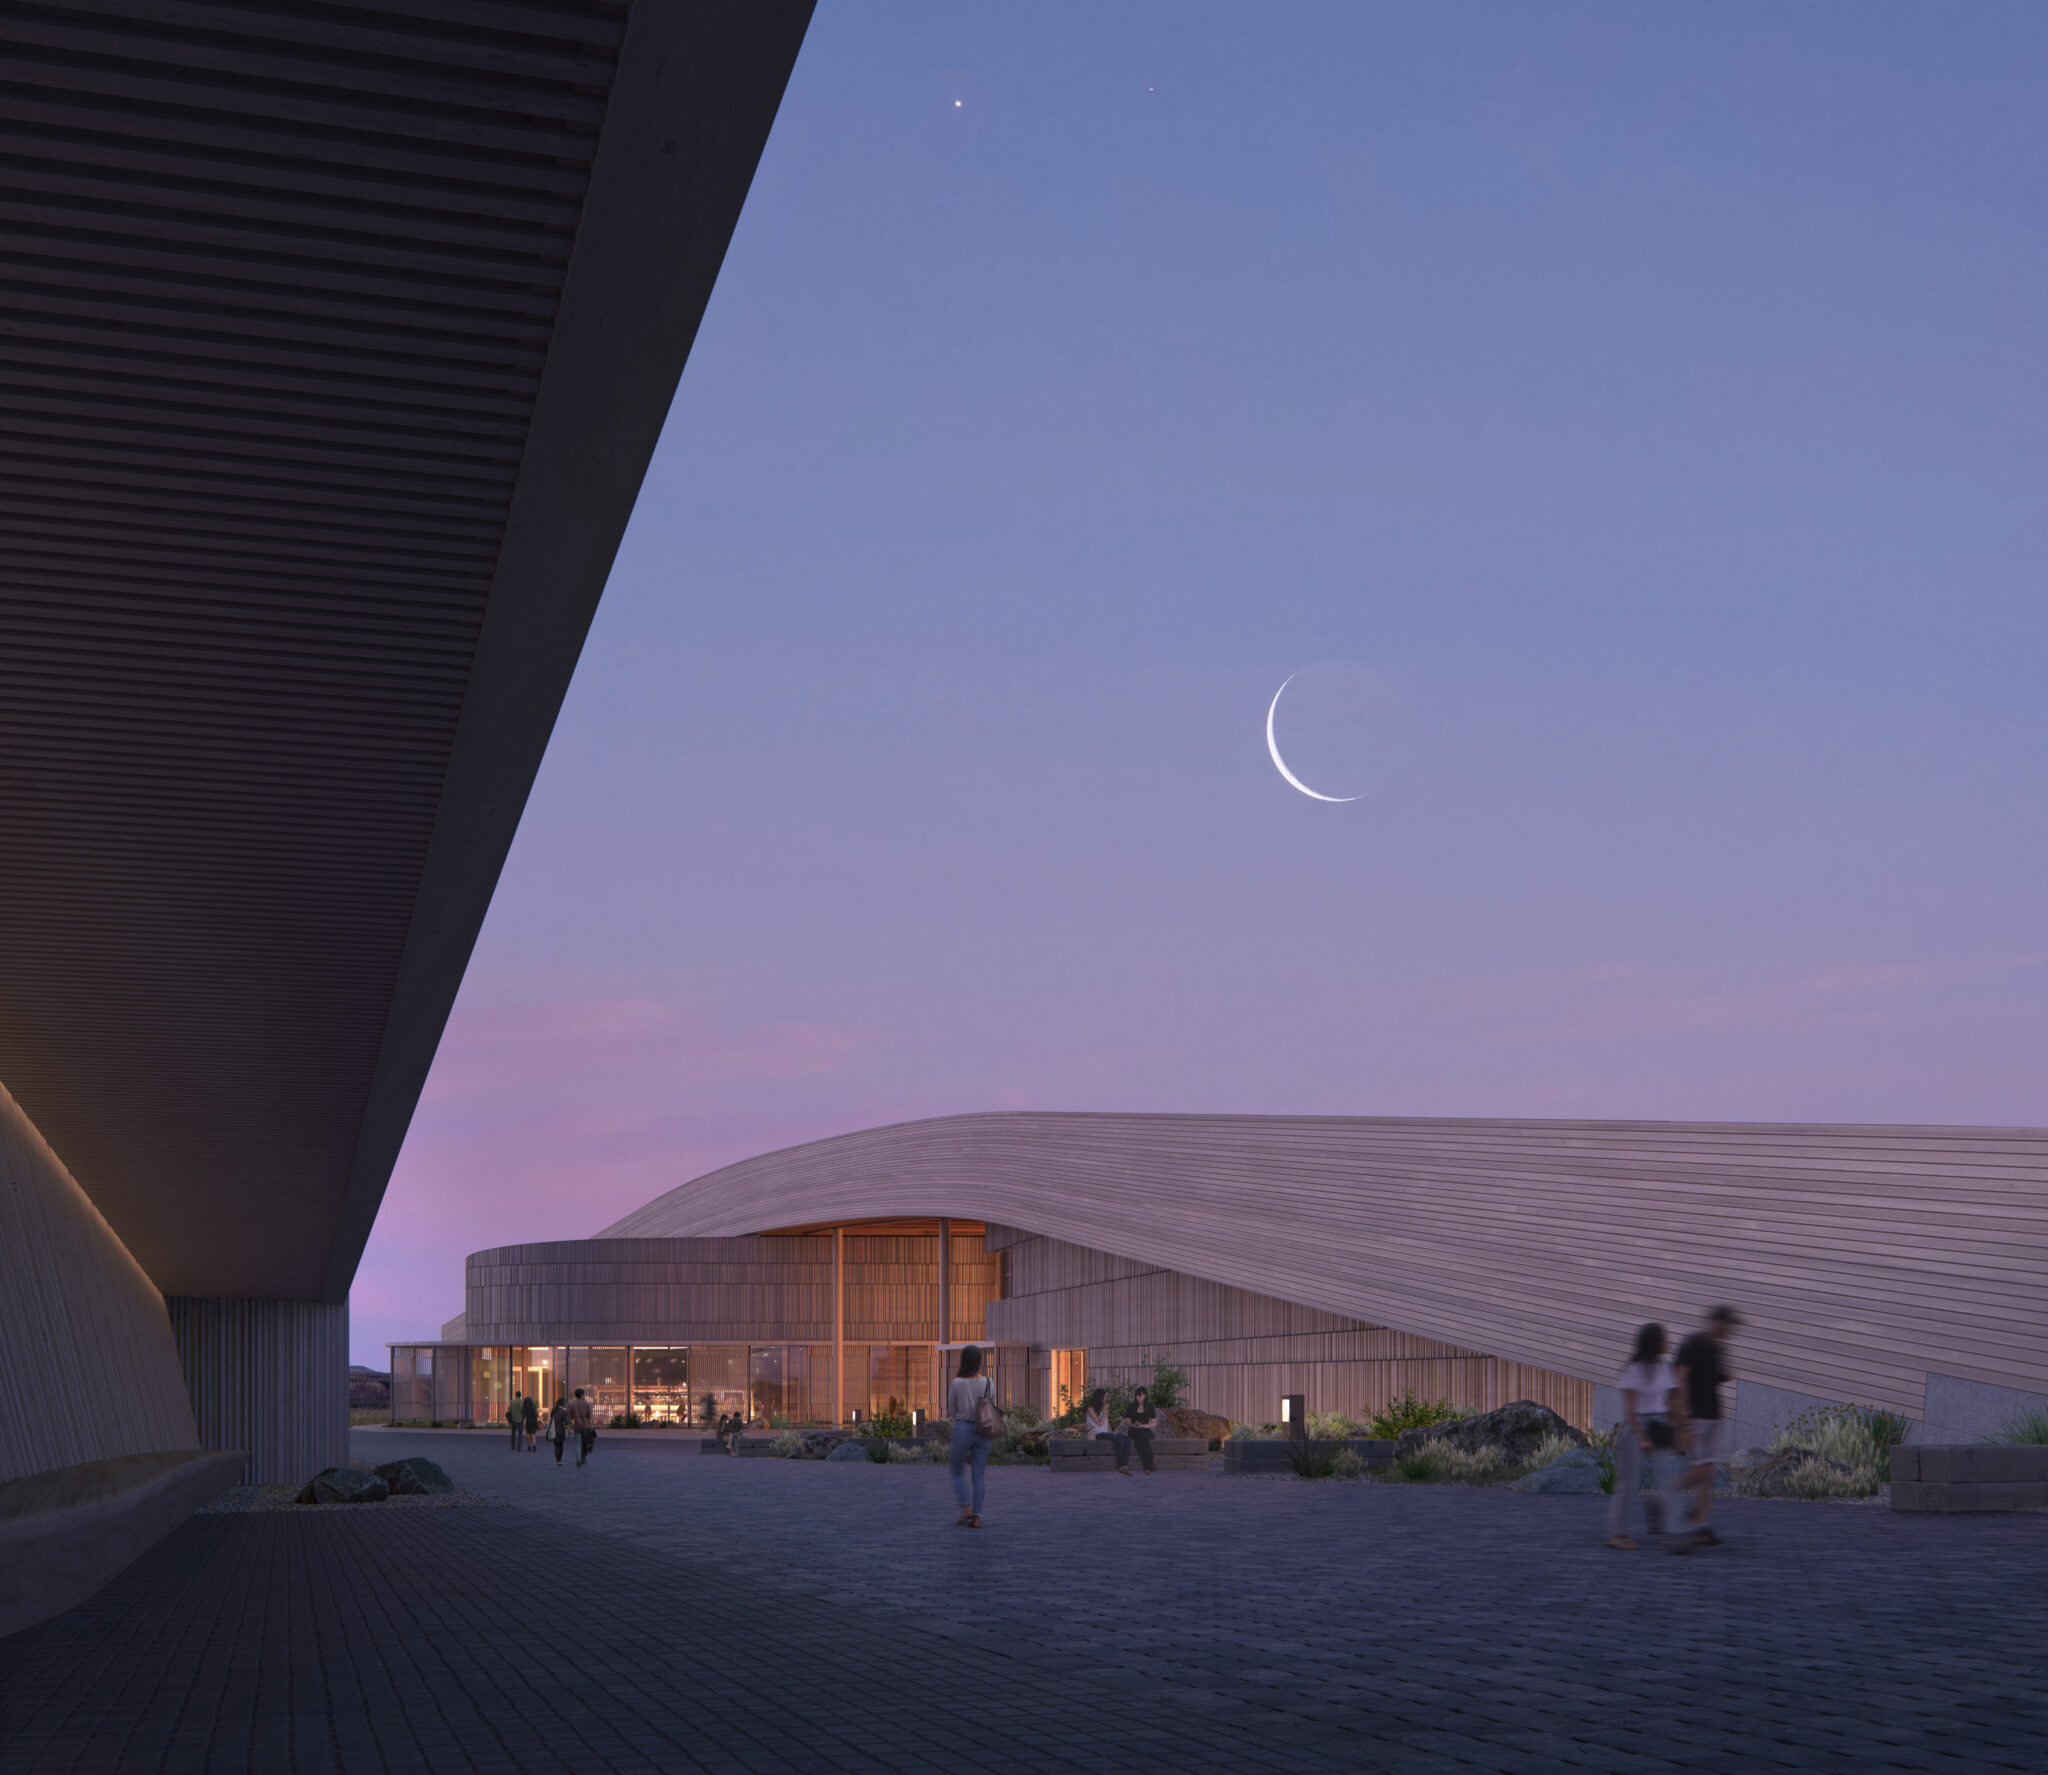 Theodore Roosevelt Presidential Library - JLG Architects in collaboration with Snohetta - Image by Snohetta